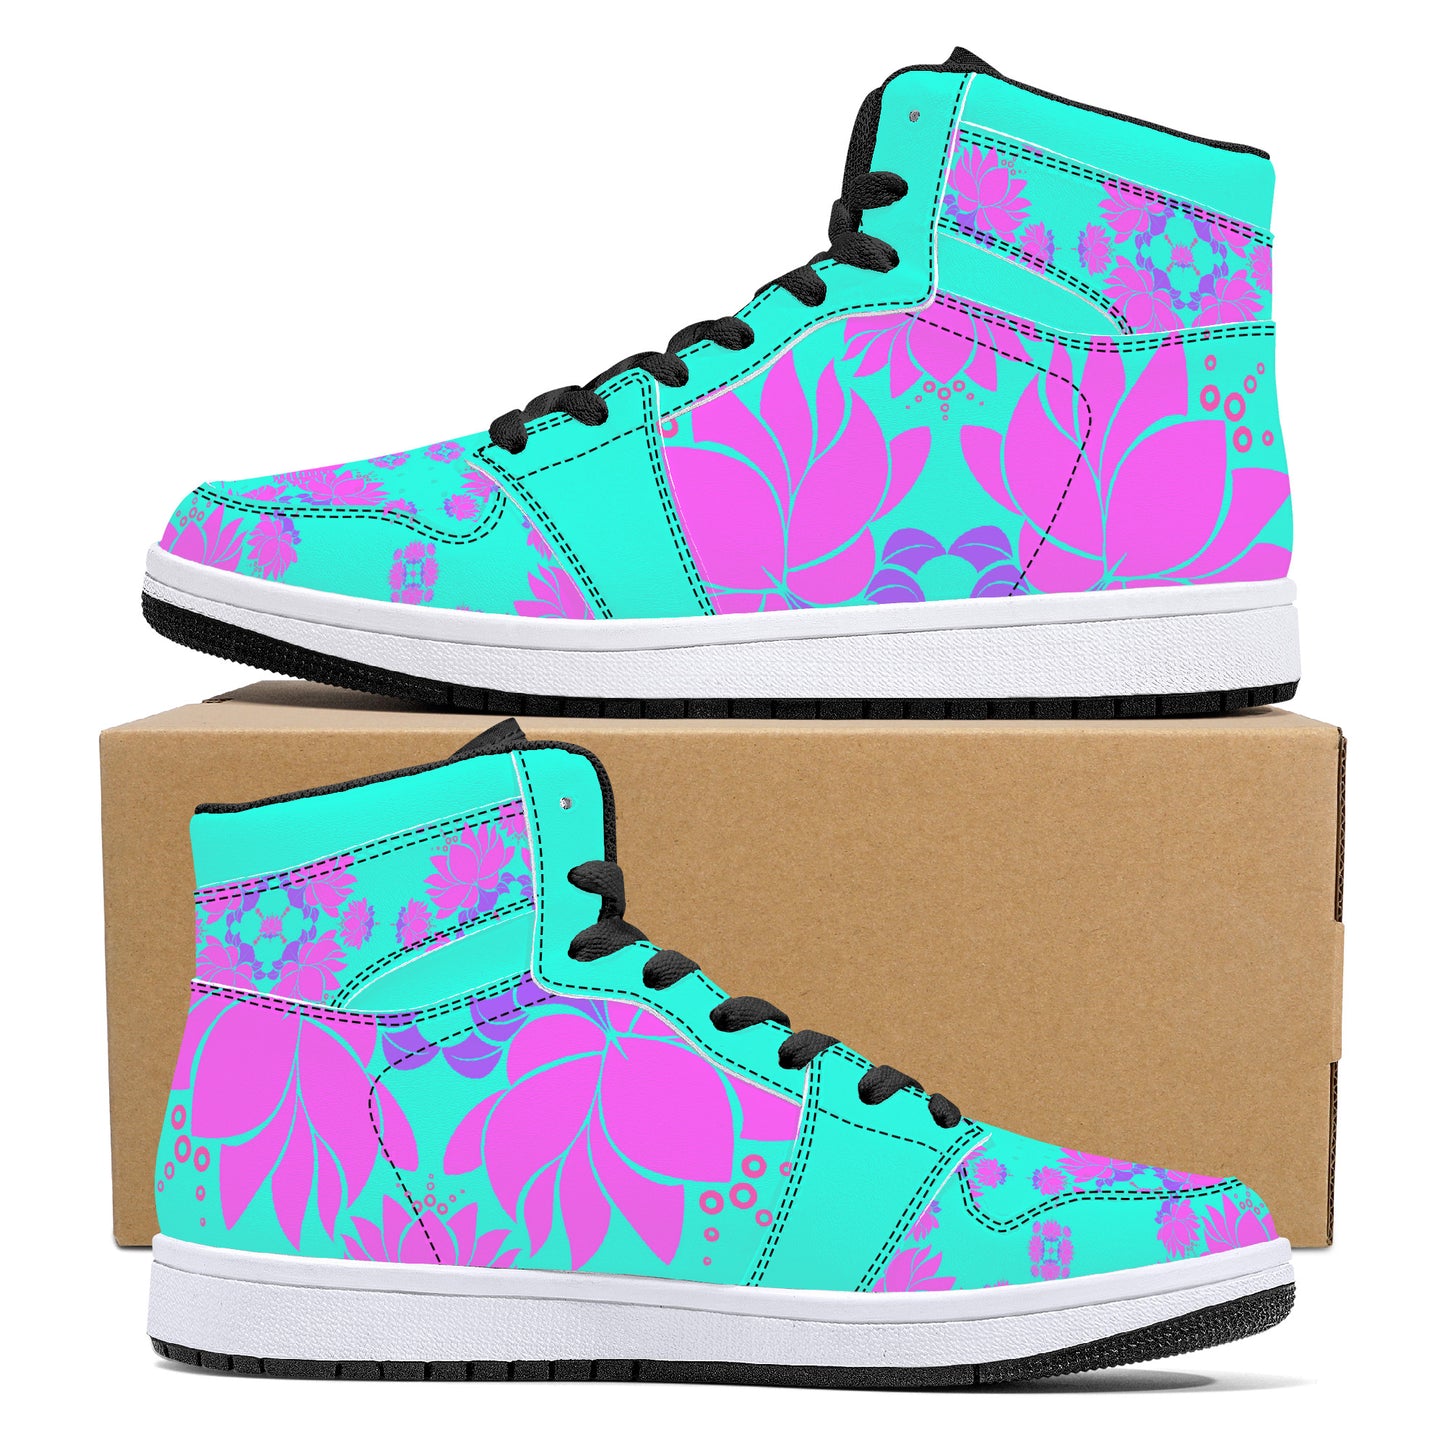 "Lotus" High-Top Synthetic Leather Sneakers